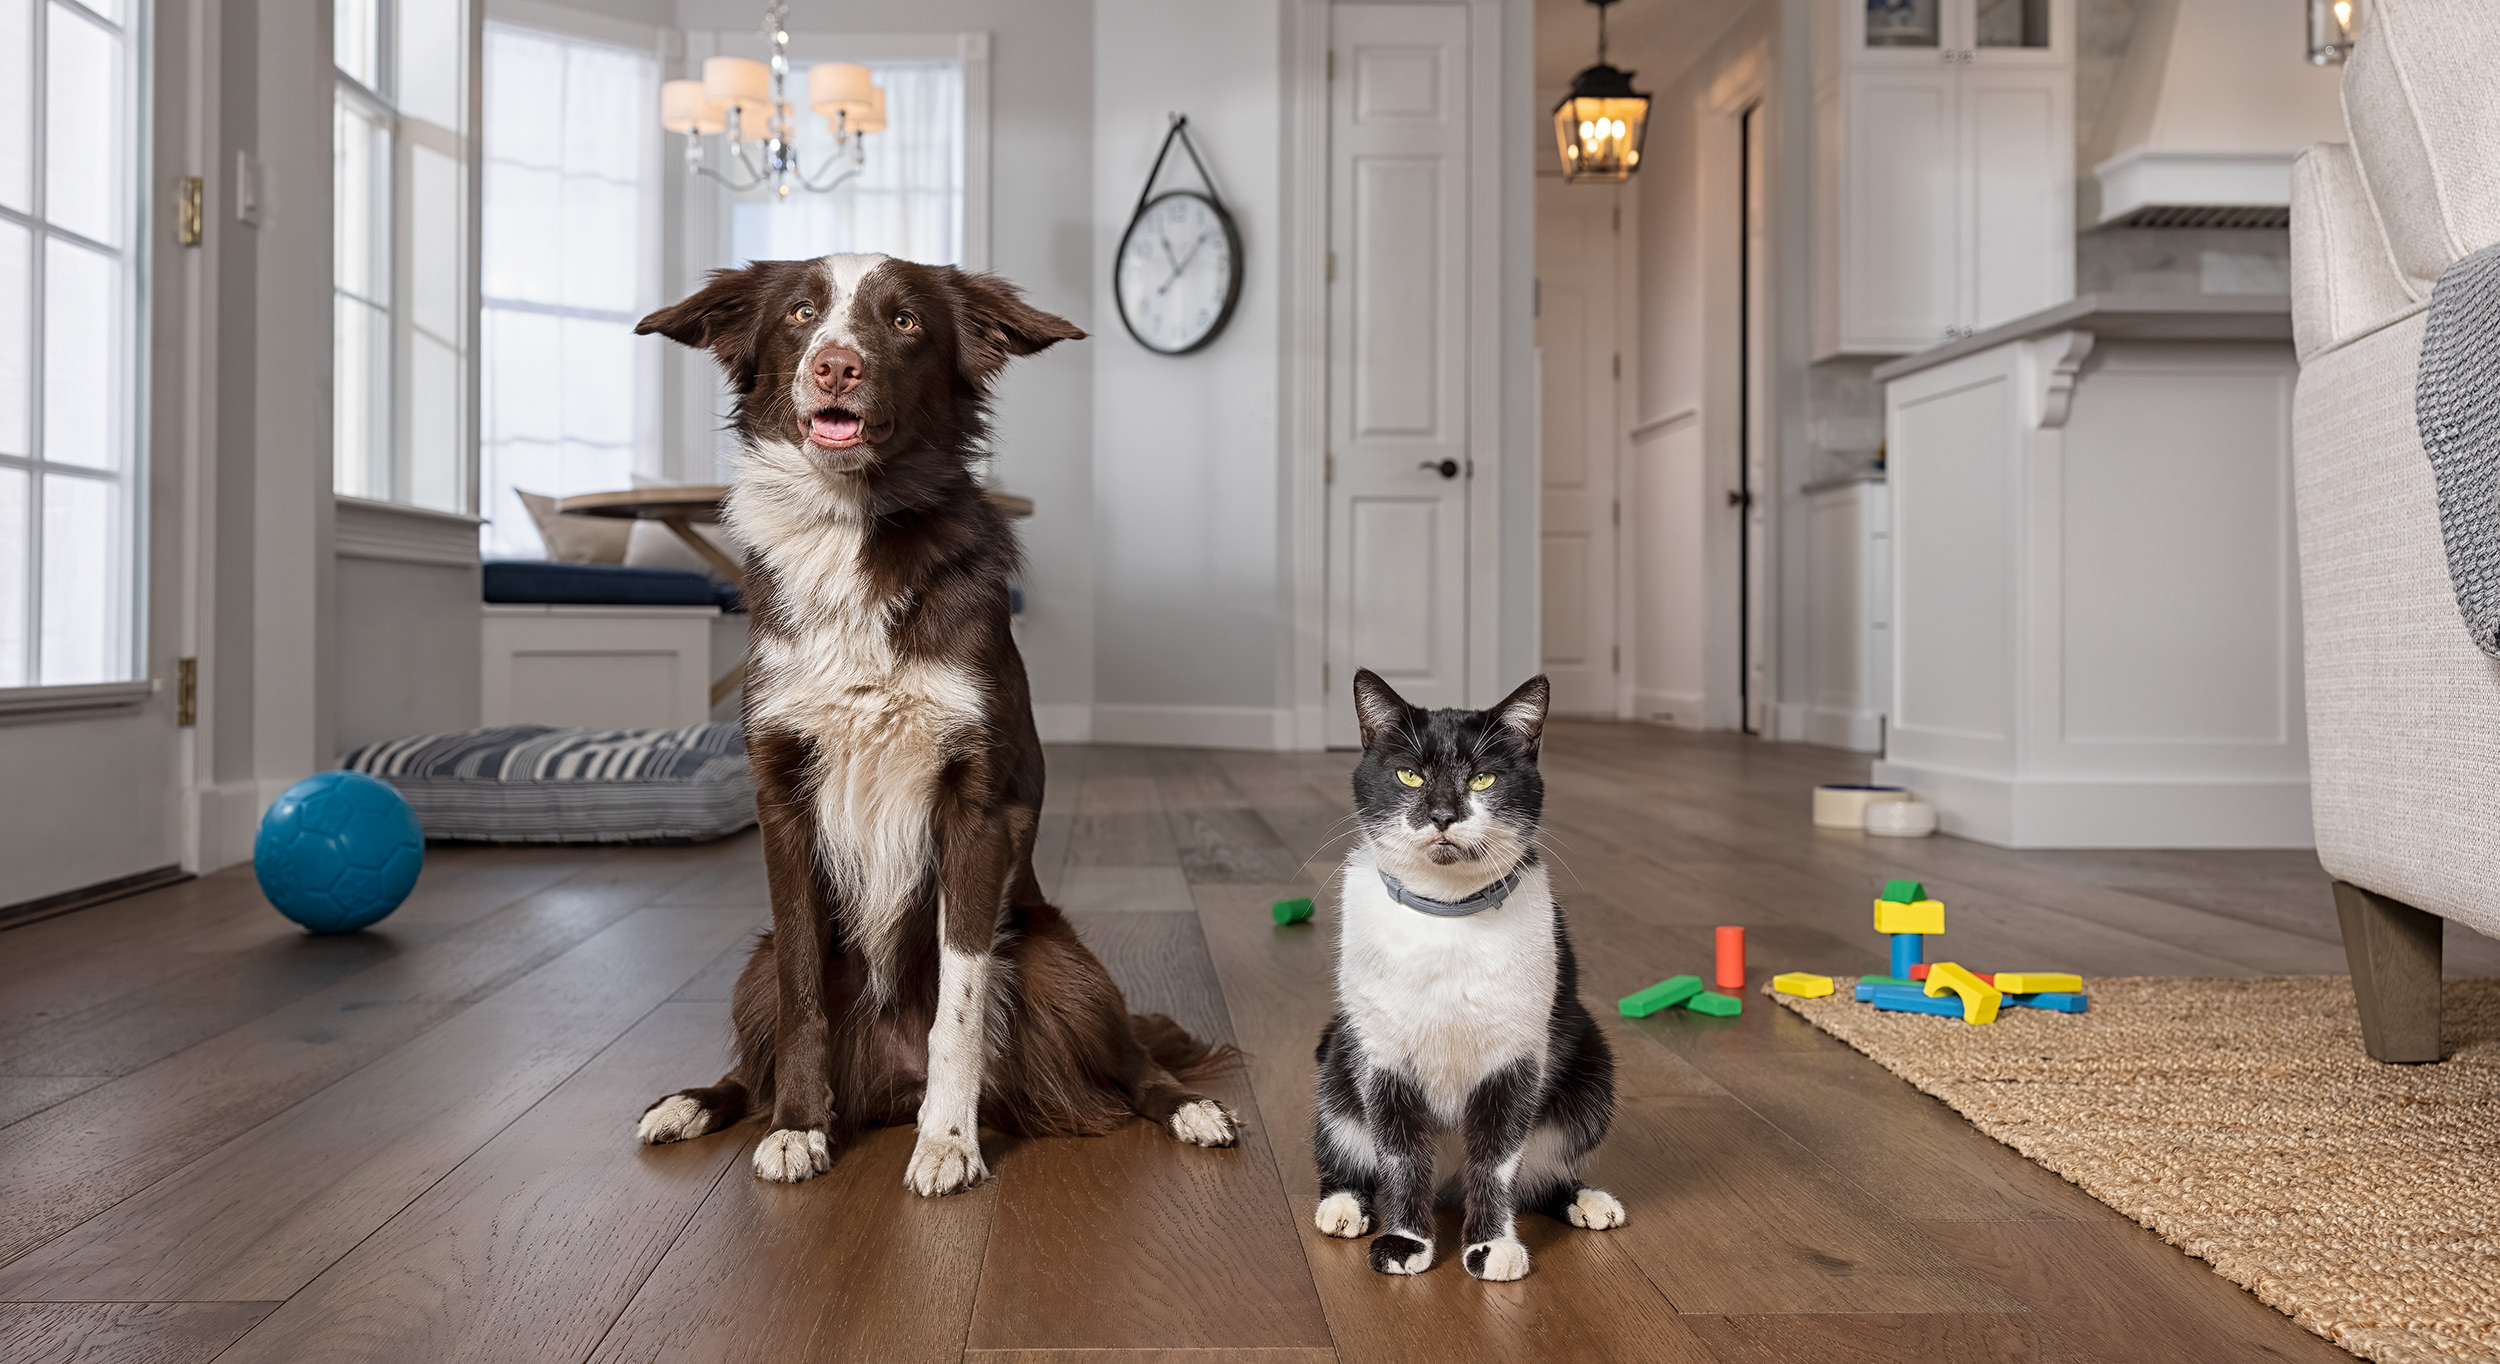 Dog and Cat sitting next to each other in living room for Seresto Flea and Tick Collar ad. 